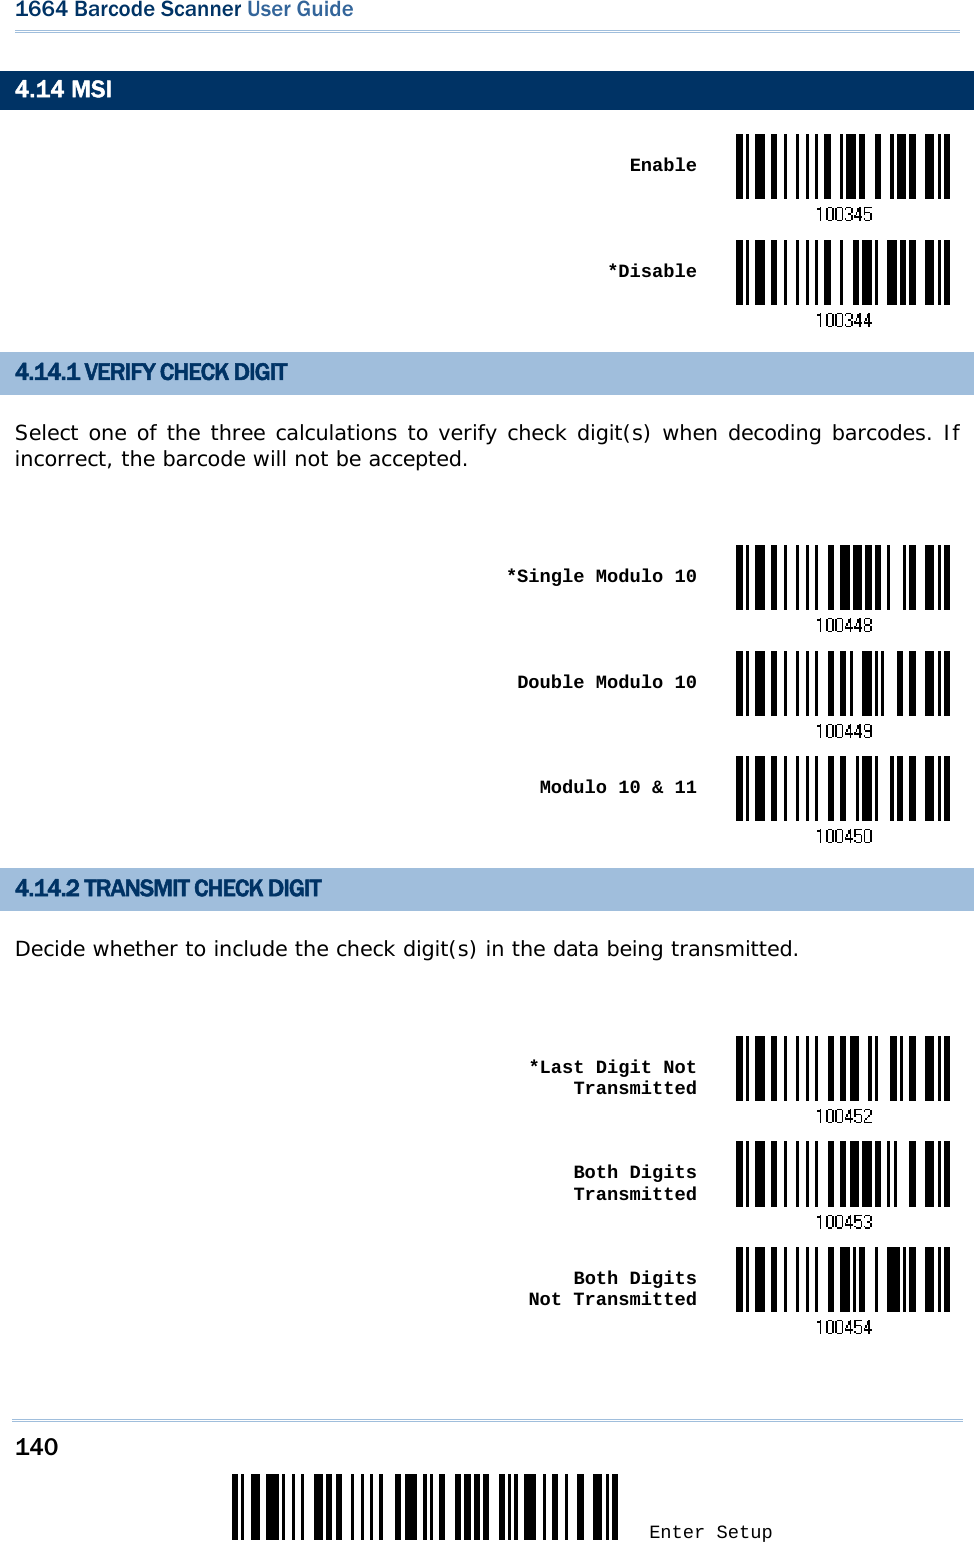 140 Enter Setup 1664 Barcode Scanner User Guide  4.14 MSI  Enable *Disable4.14.1 VERIFY CHECK DIGIT Select one of the three calculations to verify check digit(s) when decoding barcodes. If incorrect, the barcode will not be accepted.   *Single Modulo 10 Double Modulo 10 Modulo 10 &amp; 114.14.2 TRANSMIT CHECK DIGIT Decide whether to include the check digit(s) in the data being transmitted.   *Last Digit Not Transmitted Both Digits Transmitted Both Digits  Not Transmitted